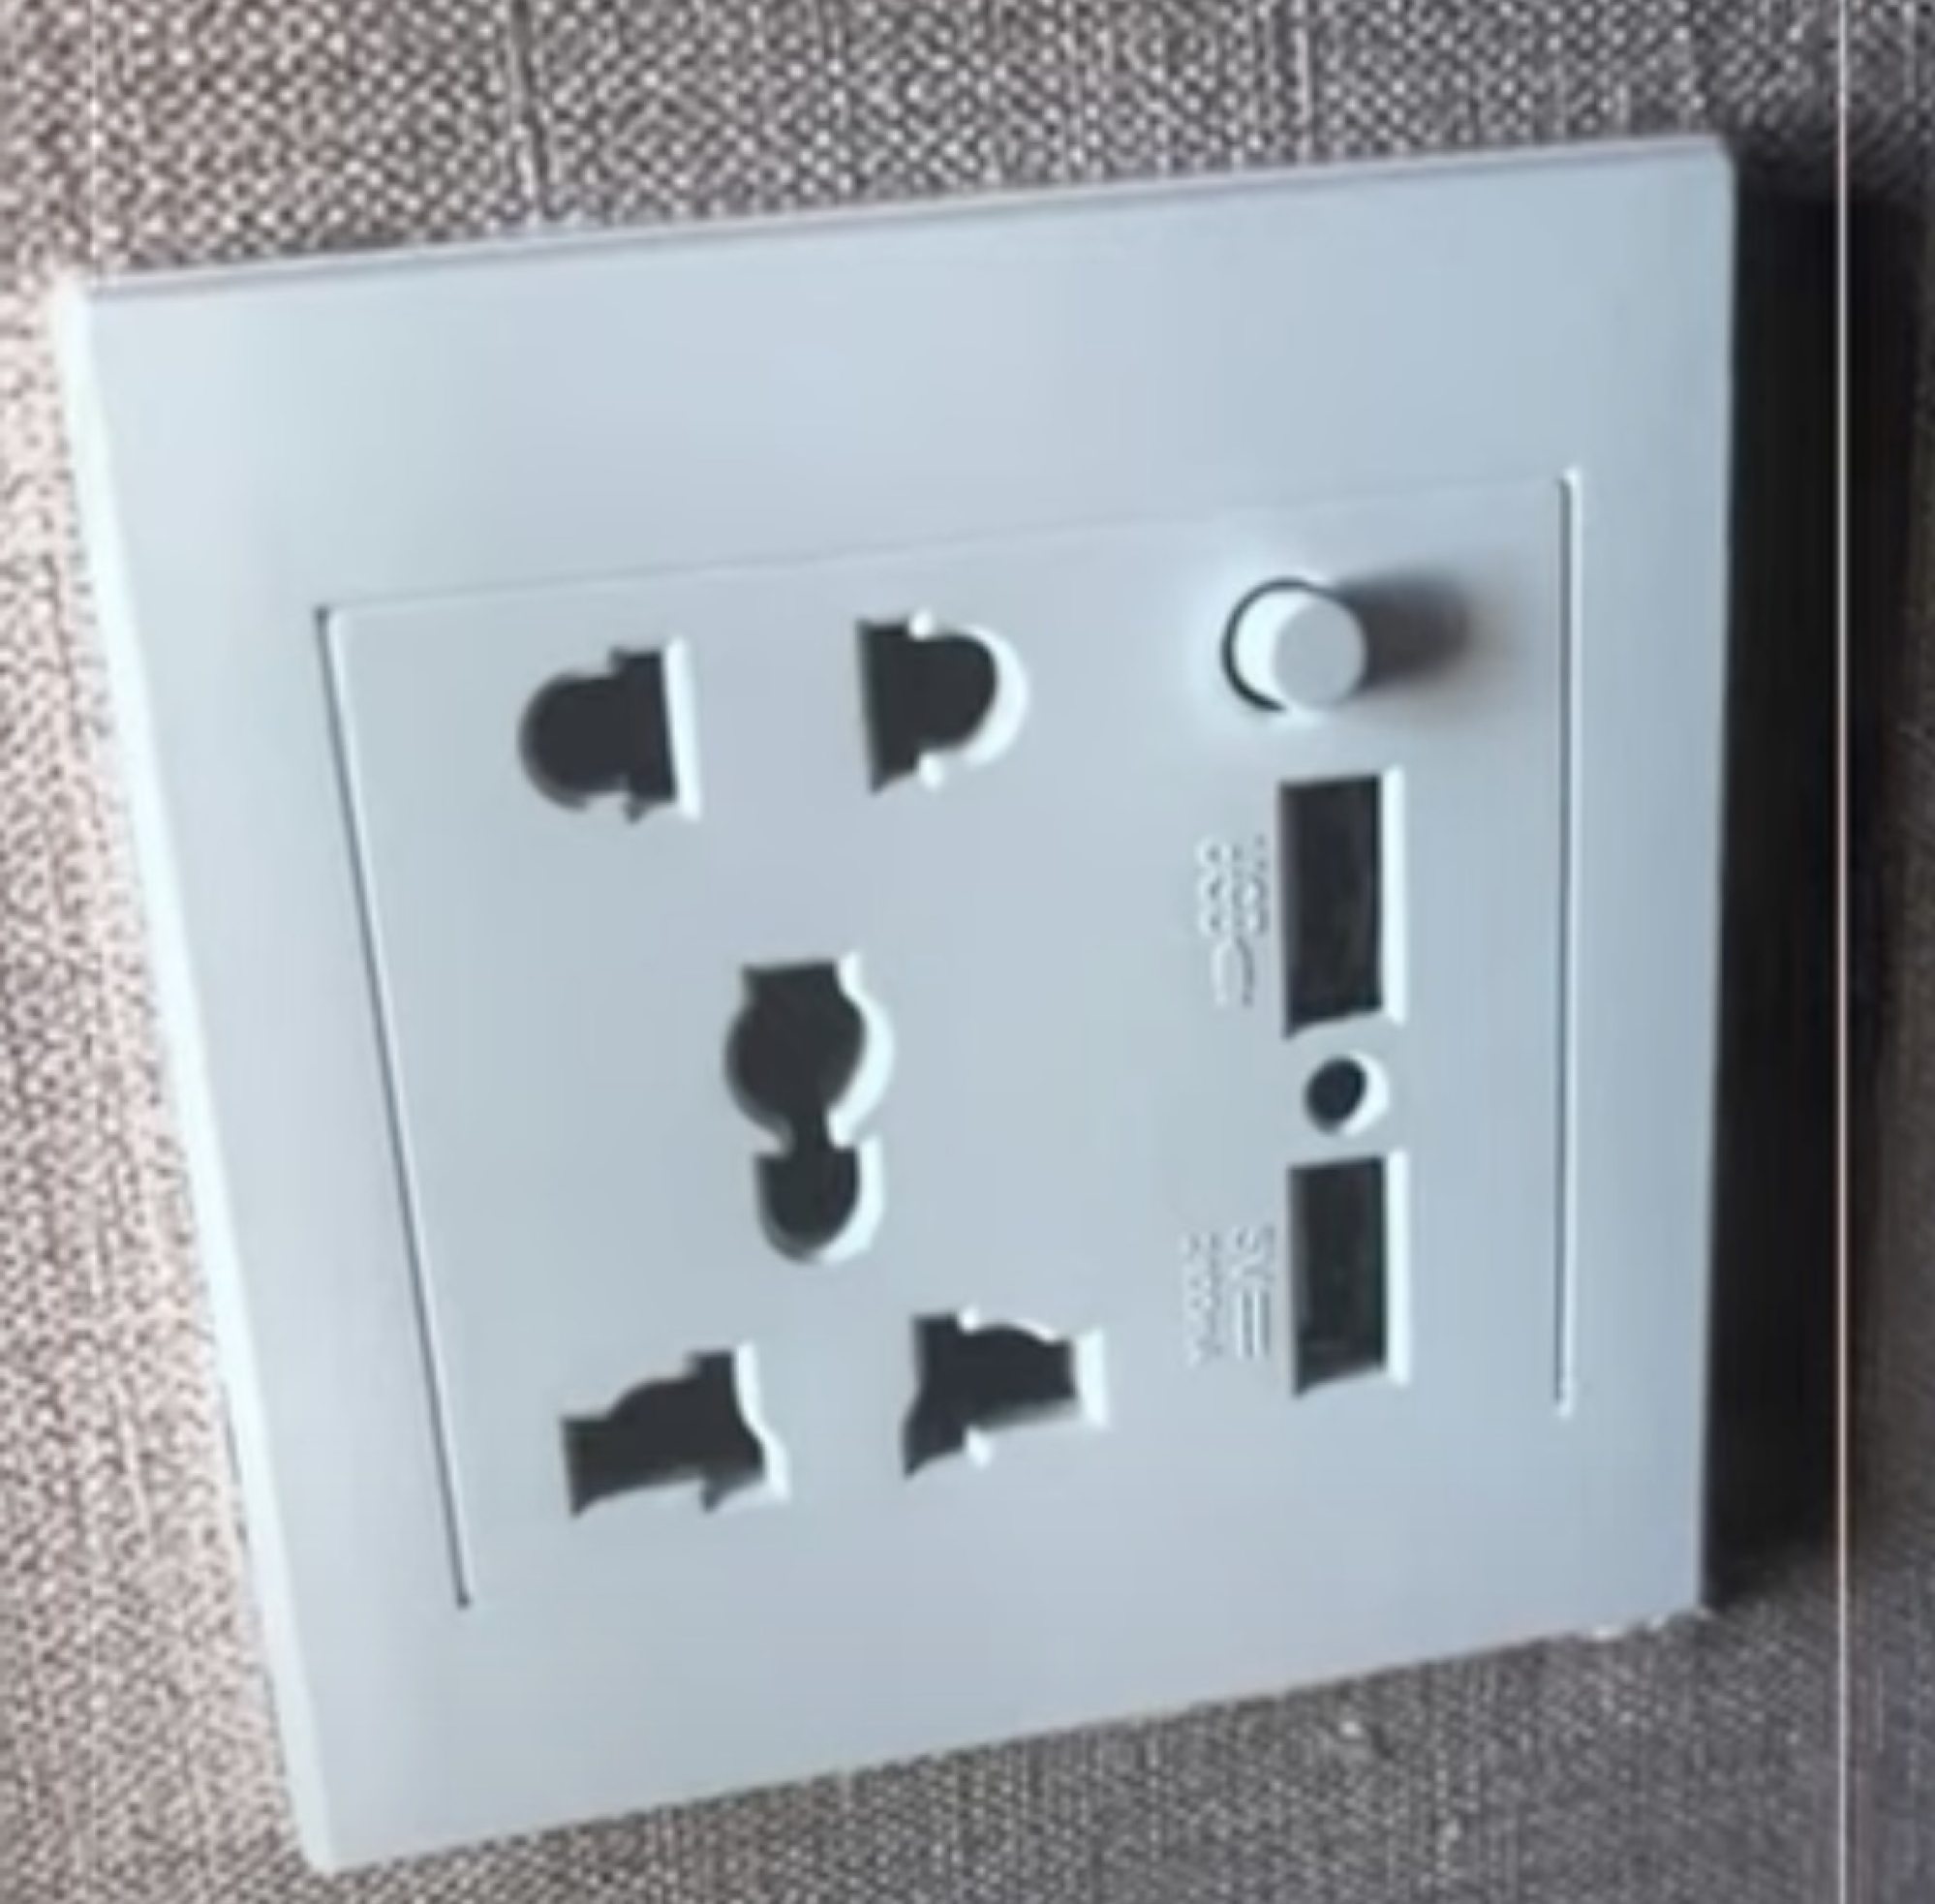 Security experts have advised people to use a torch light to make close-up inspections of sockets, walls and plugs. Photo: YouTube/@Oriental Daily News Malaysia